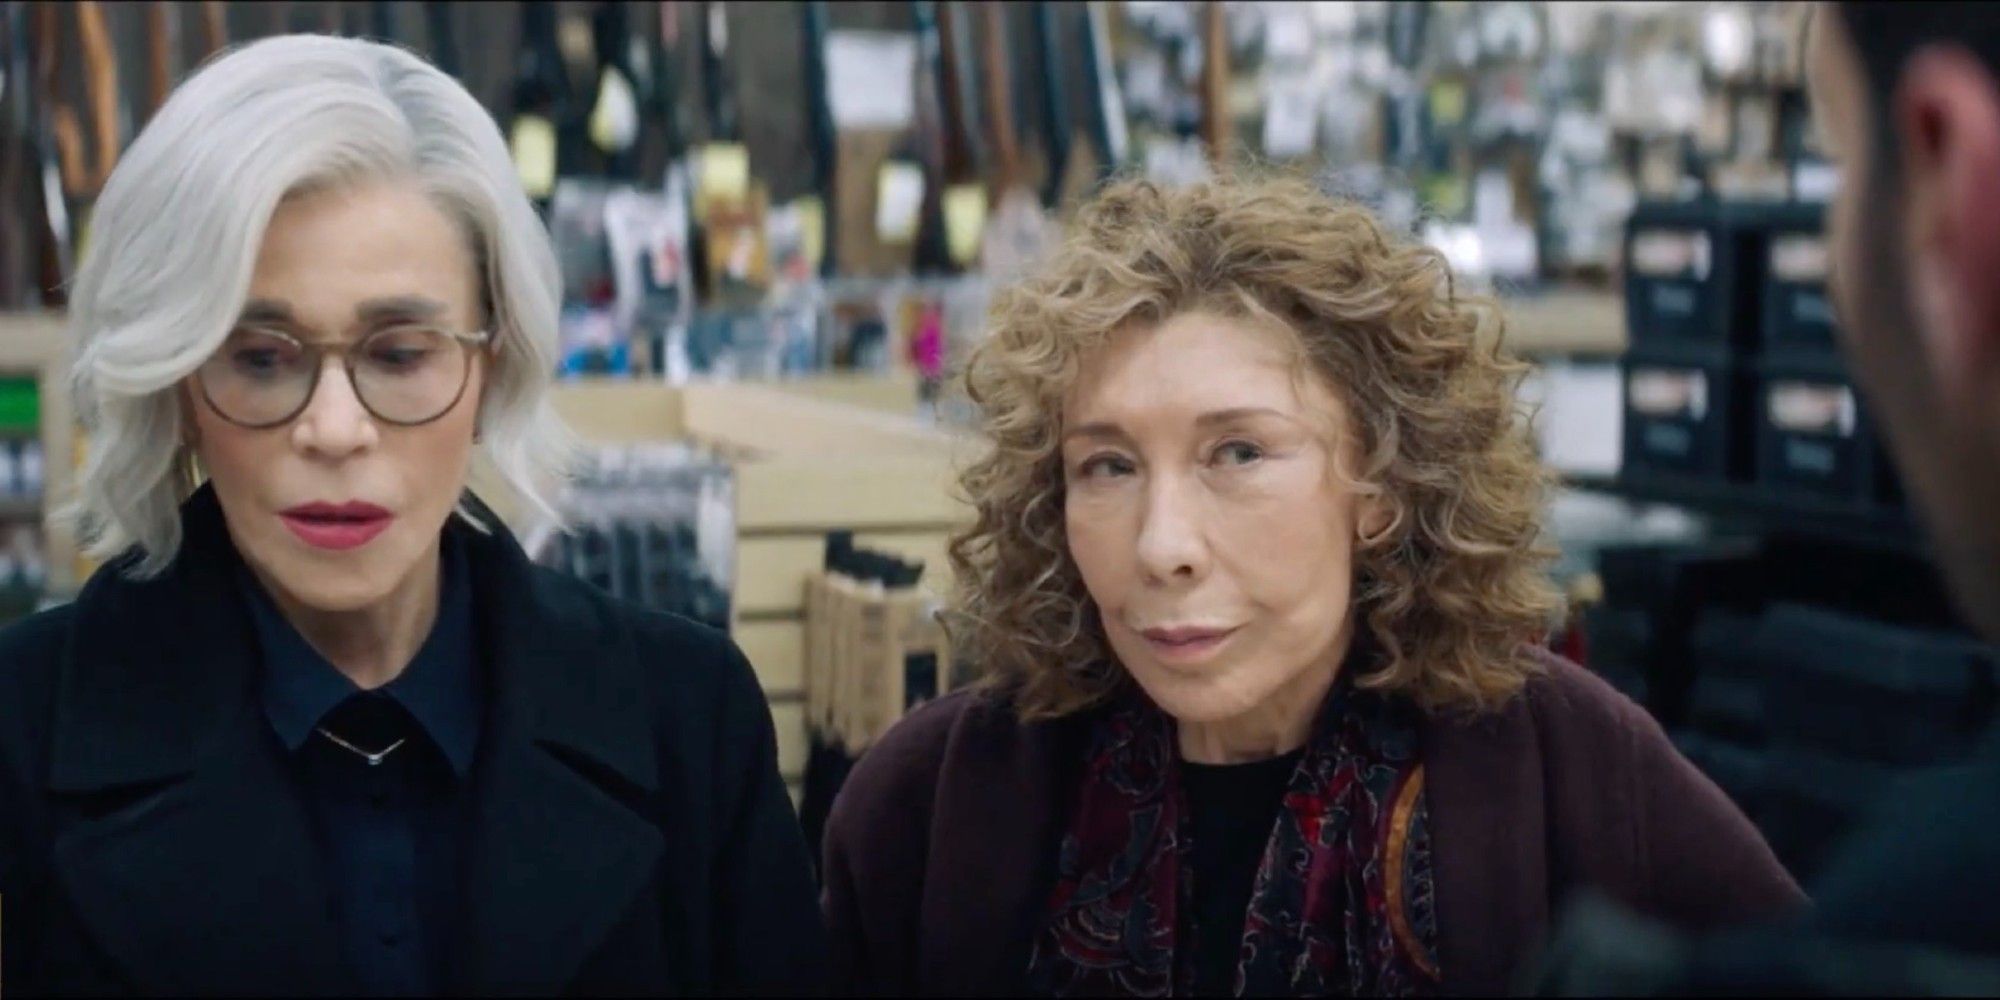 Lily Tomlin and Jane Fonda at a store in Moving On